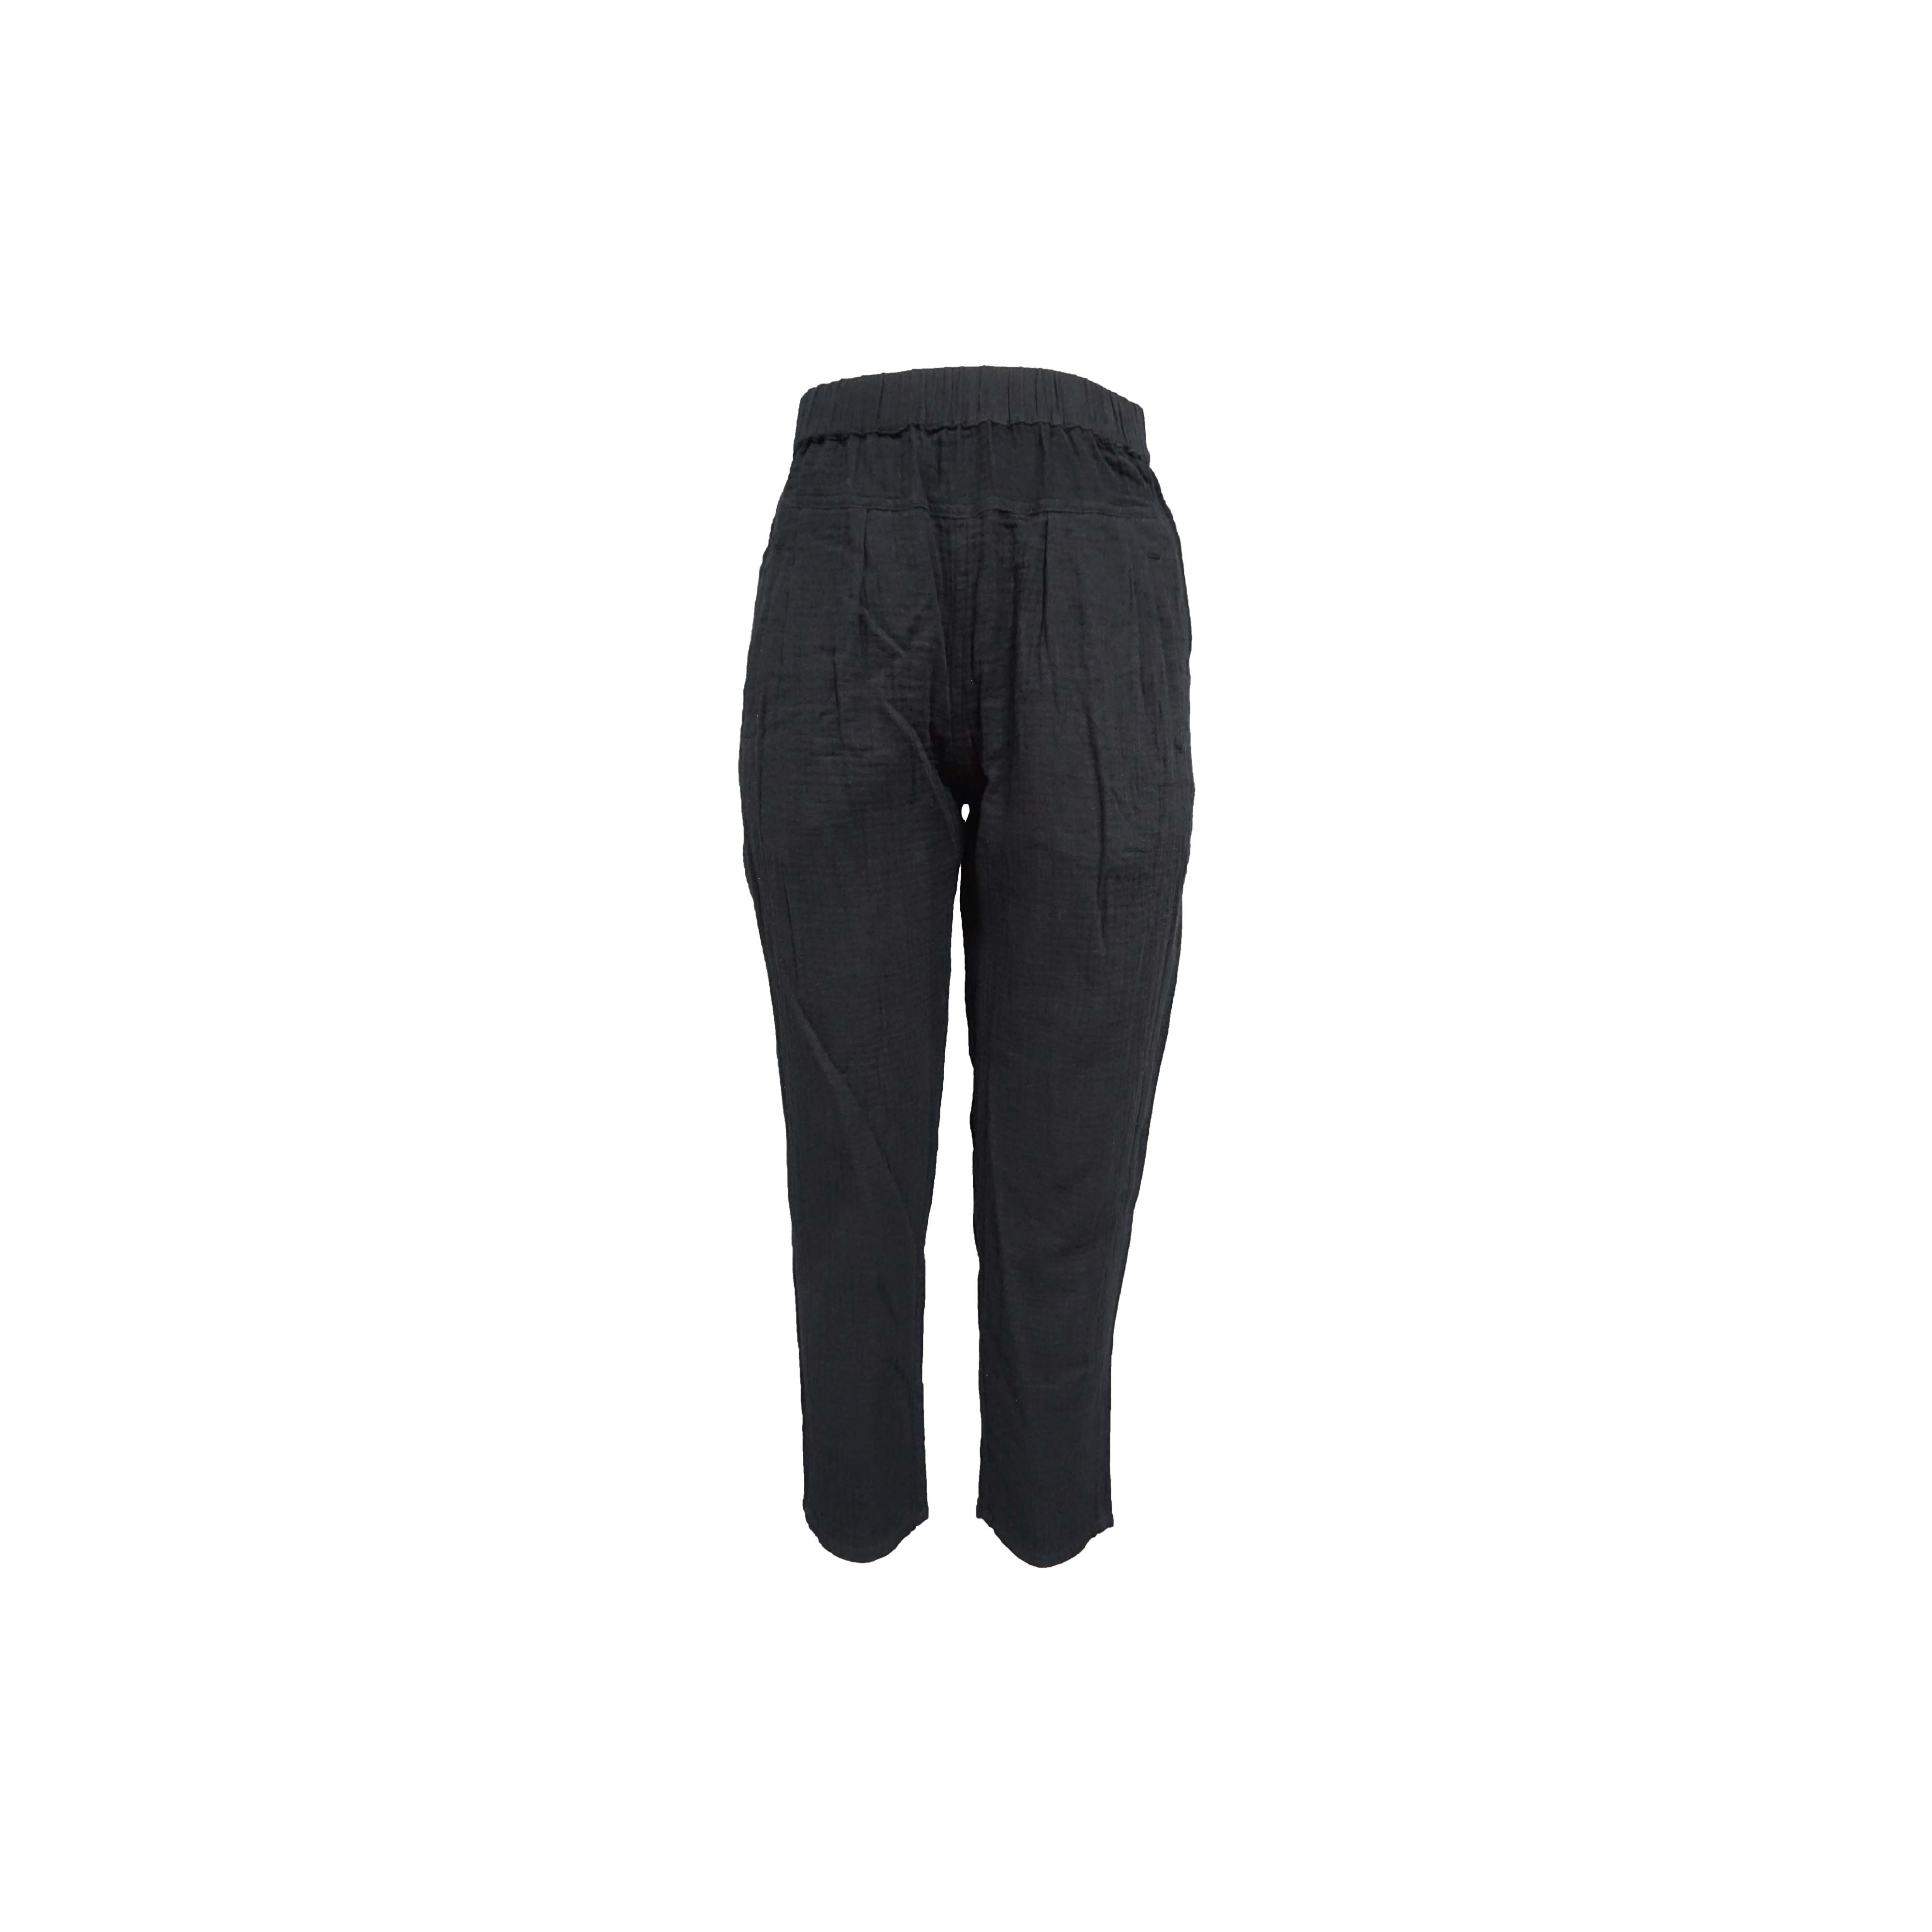 Black Cotton Casual Trousers